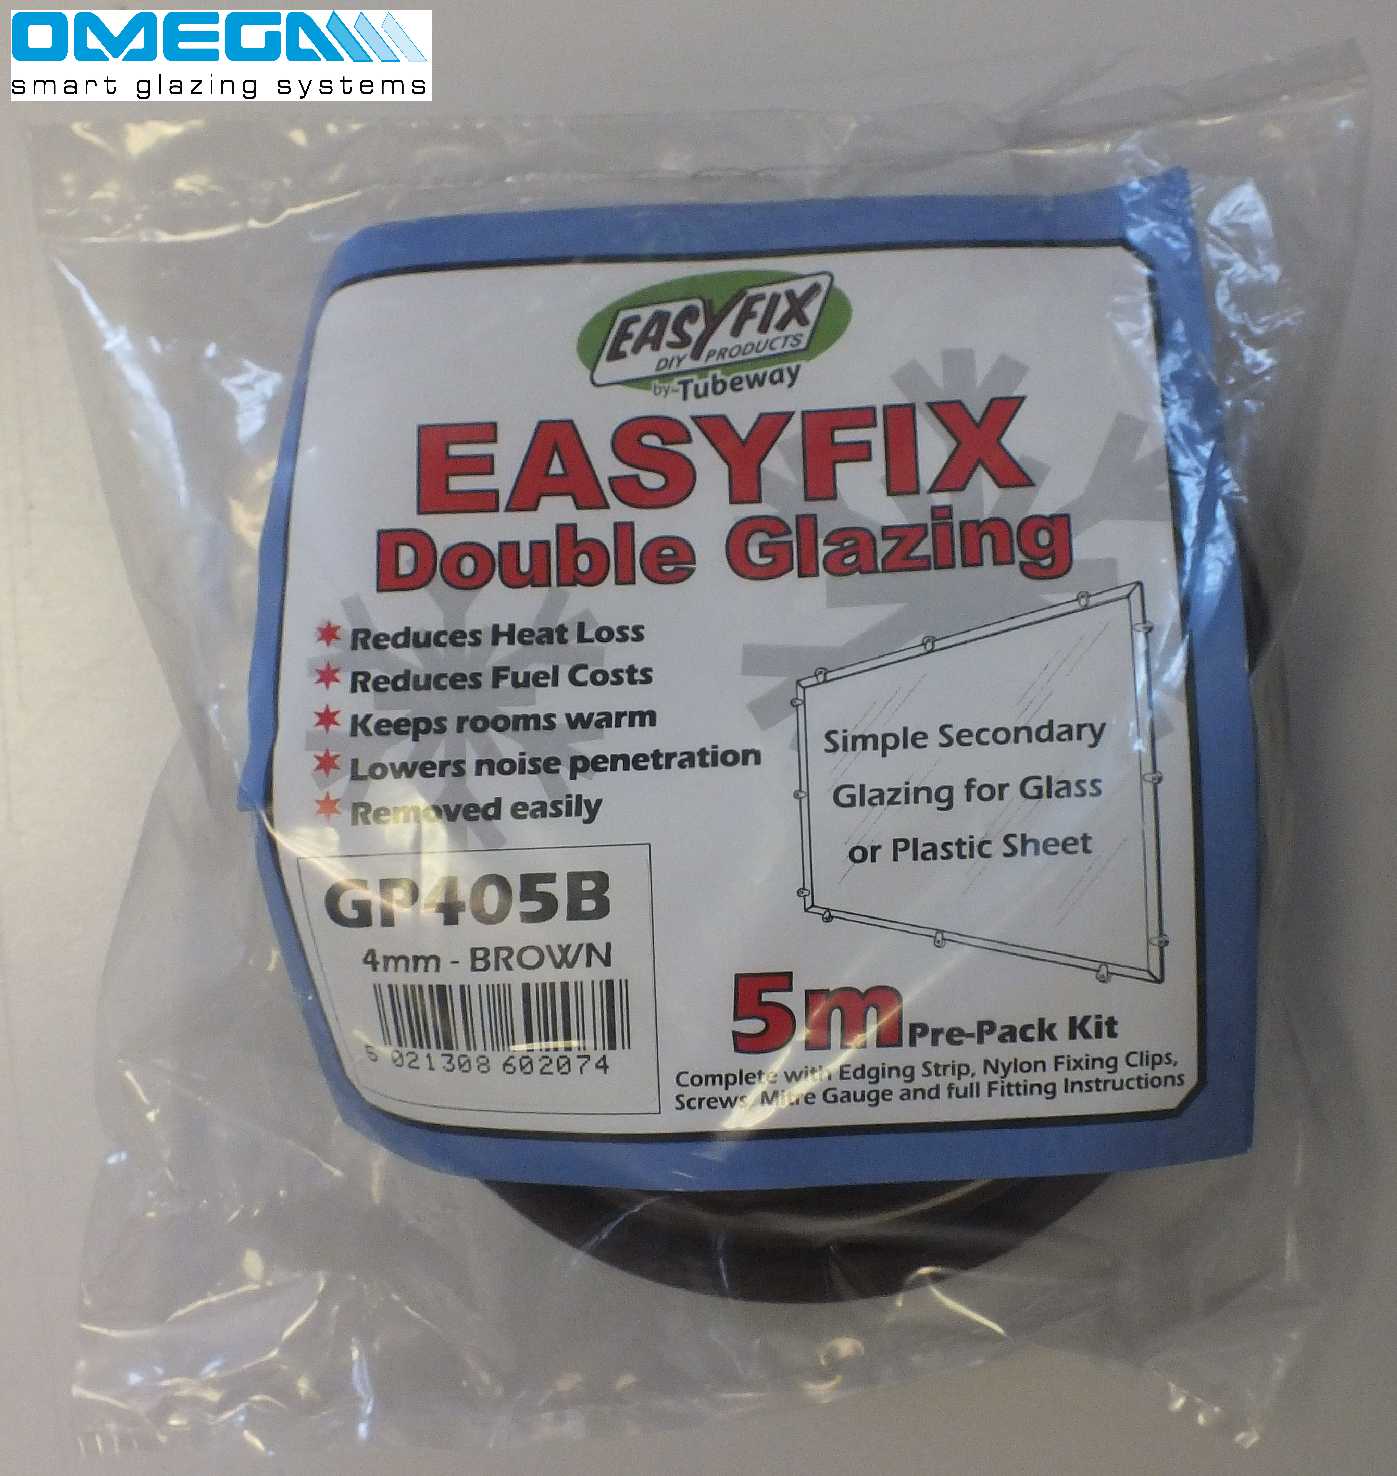 Easyfix Clipglaze Edging Kit - 5m roll of edging for 2mm Glazing Thickness,White, Clear or Brown from Omega Build